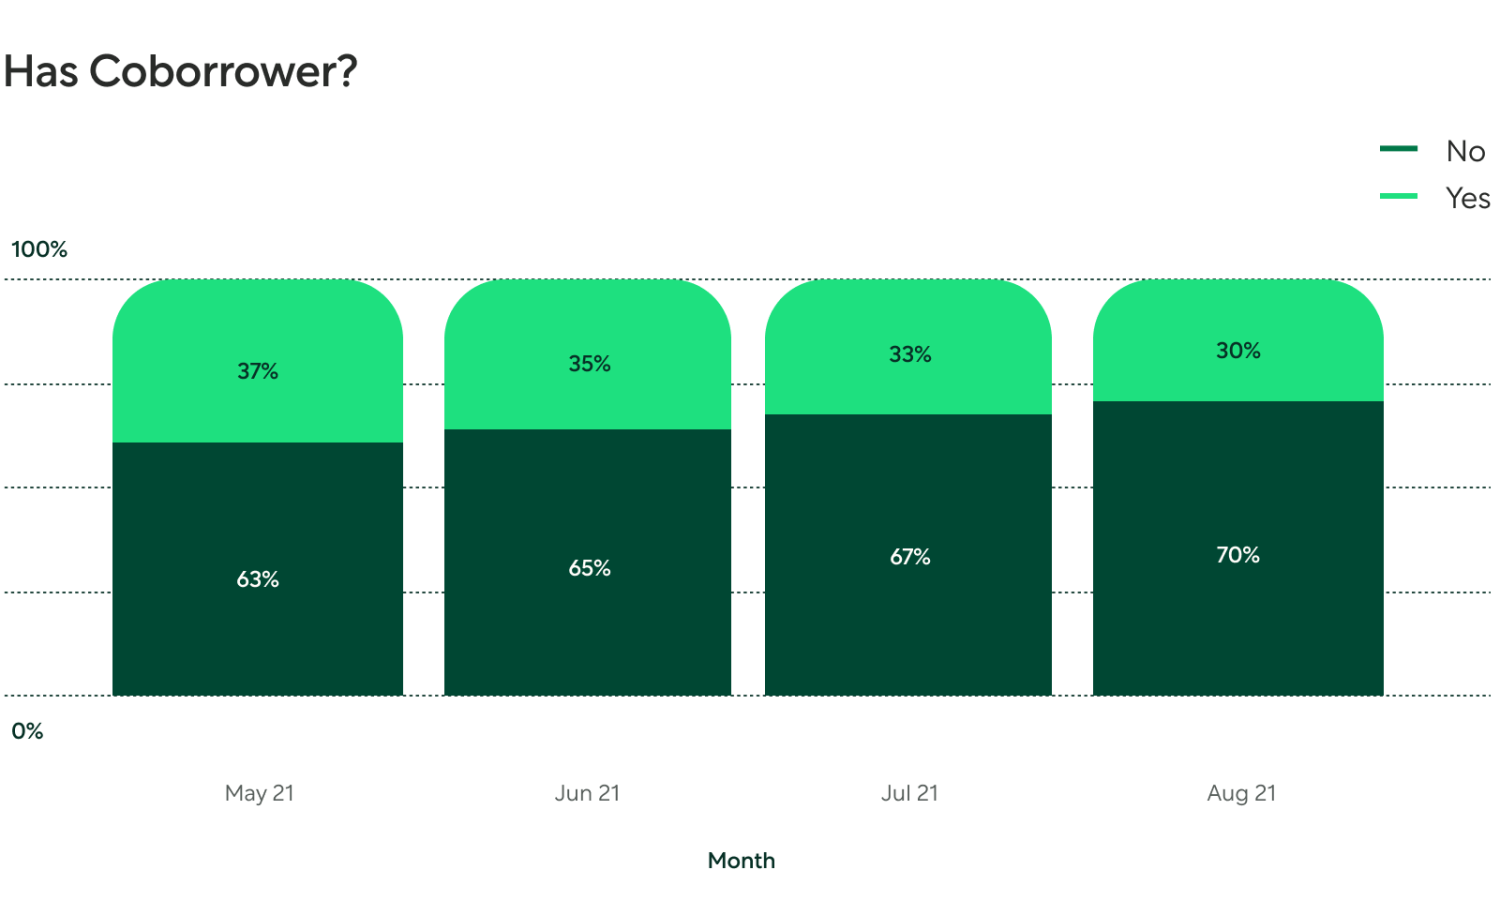 Stacked bar chart graph of co-borrower and sole purchaser trends from May 2021 to August 2021